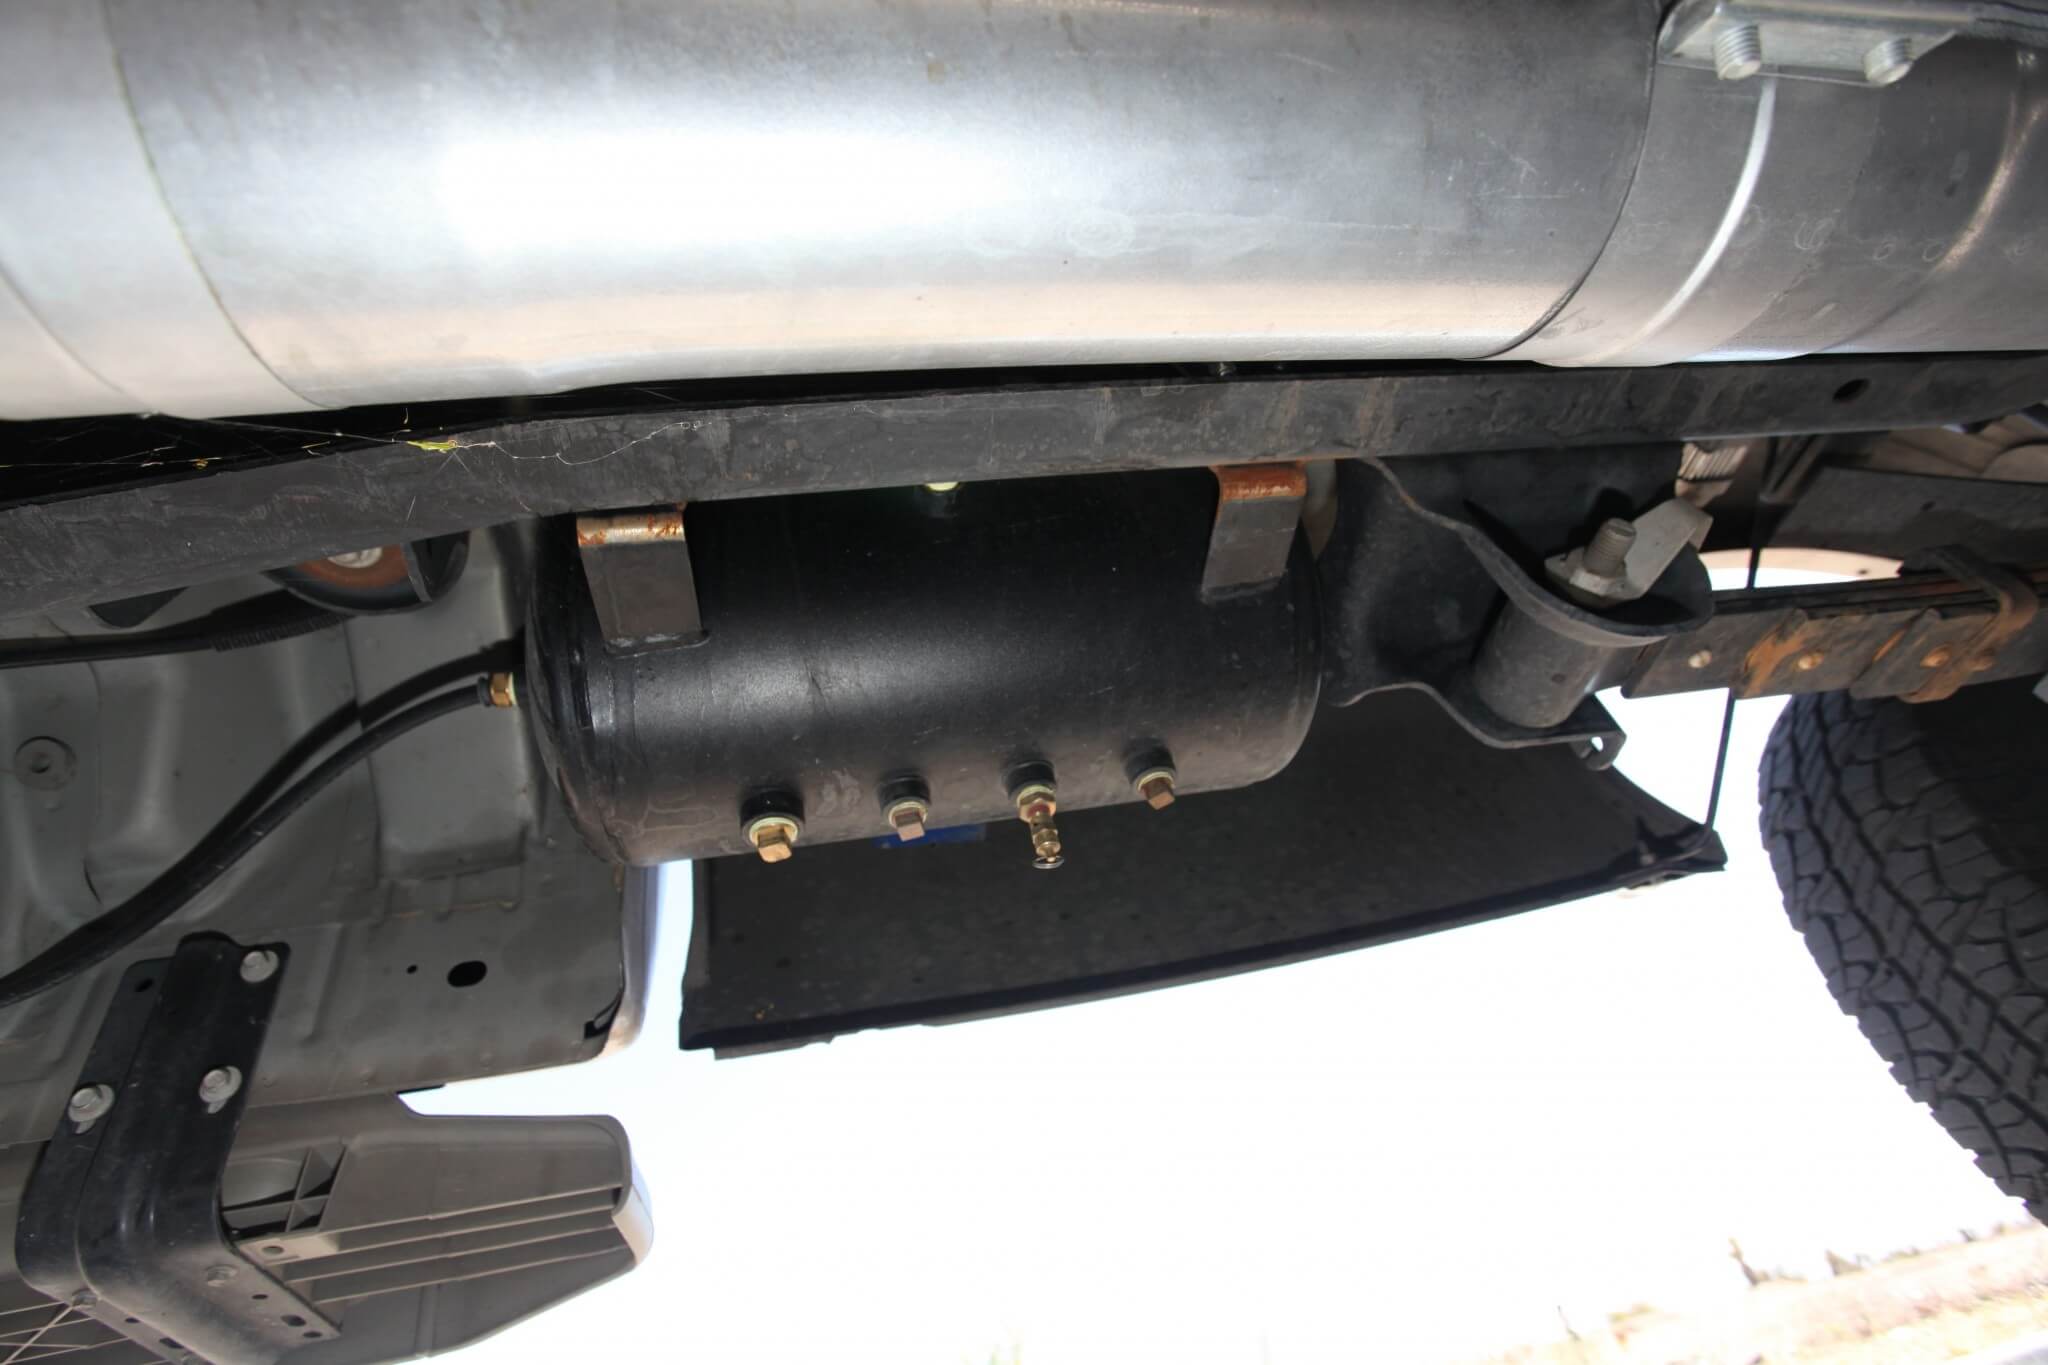 As with his dad’s Ford, Nick also installed an air system and air storage tank.